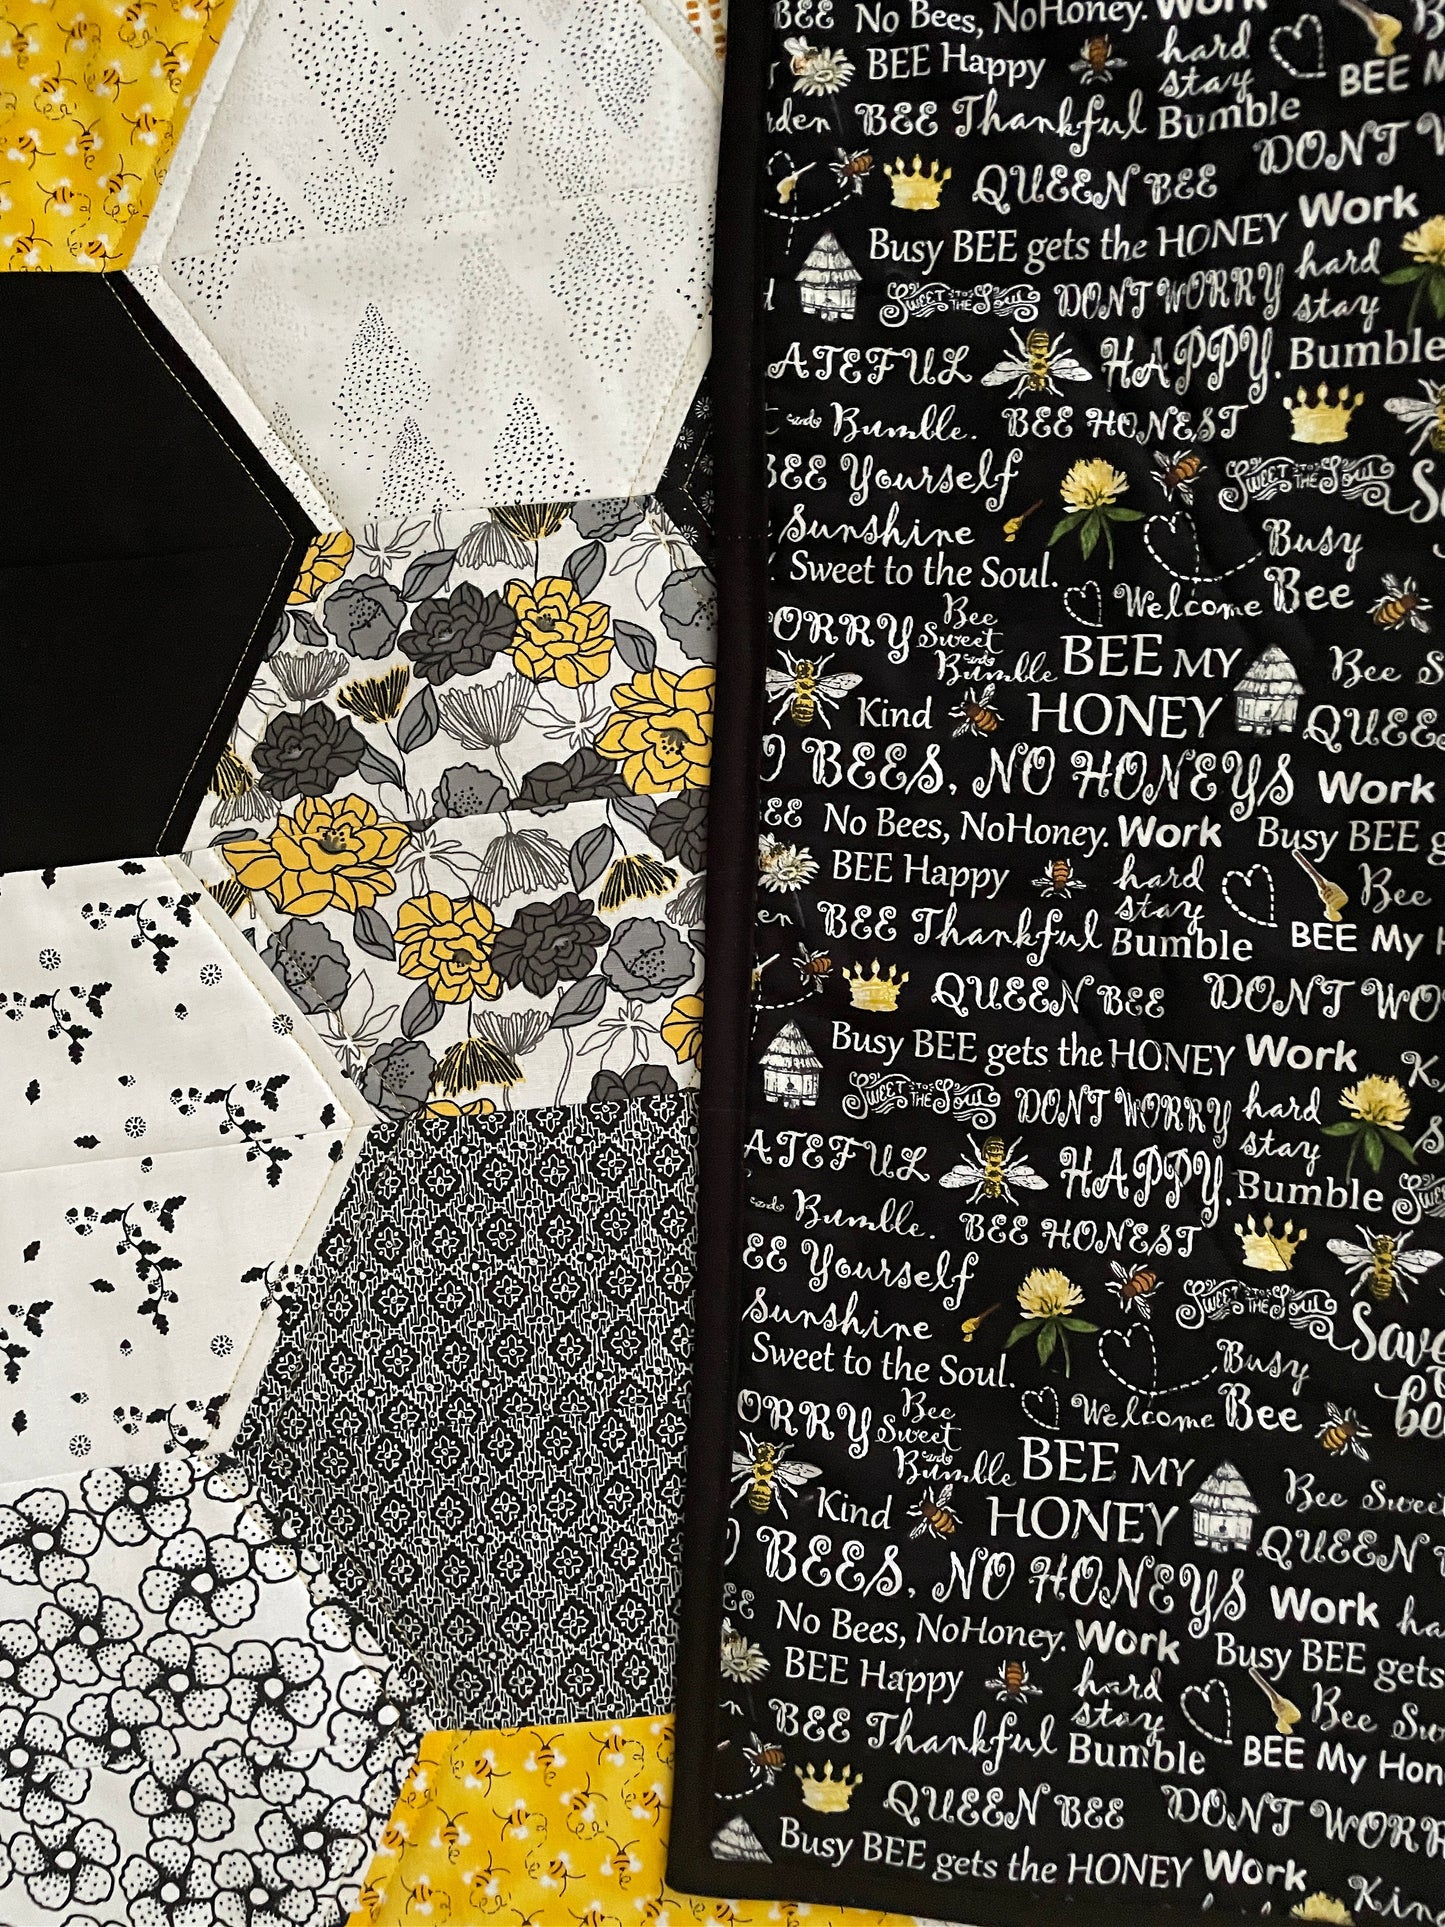 Handmade Modern Quilted Table Runner in Black, Yellow, and White Hexagons